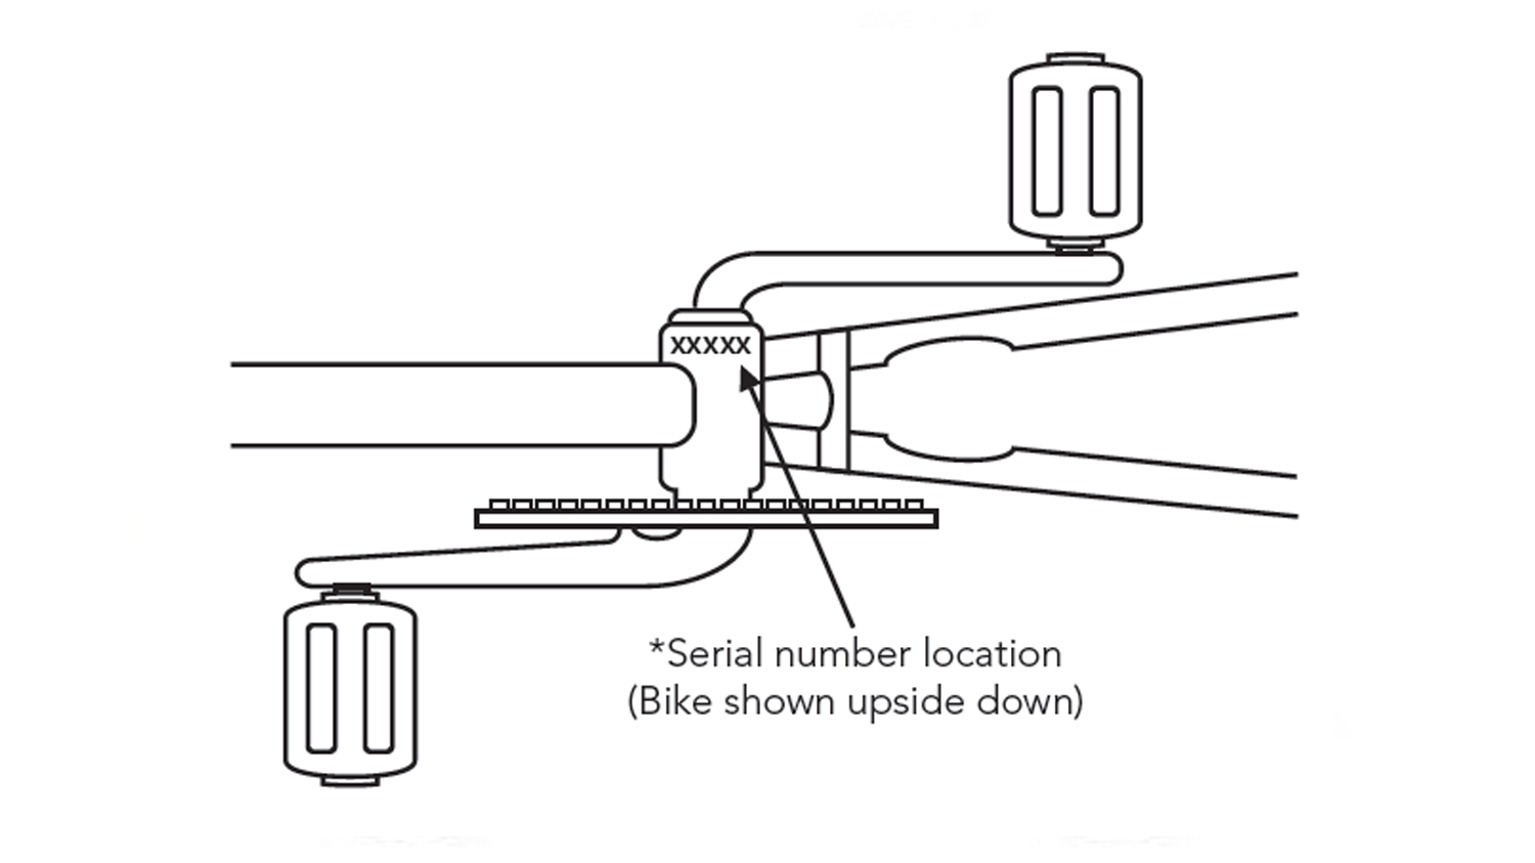 Diagram showing bike pedals and an arrow pointing to bike serial number above left pedal.